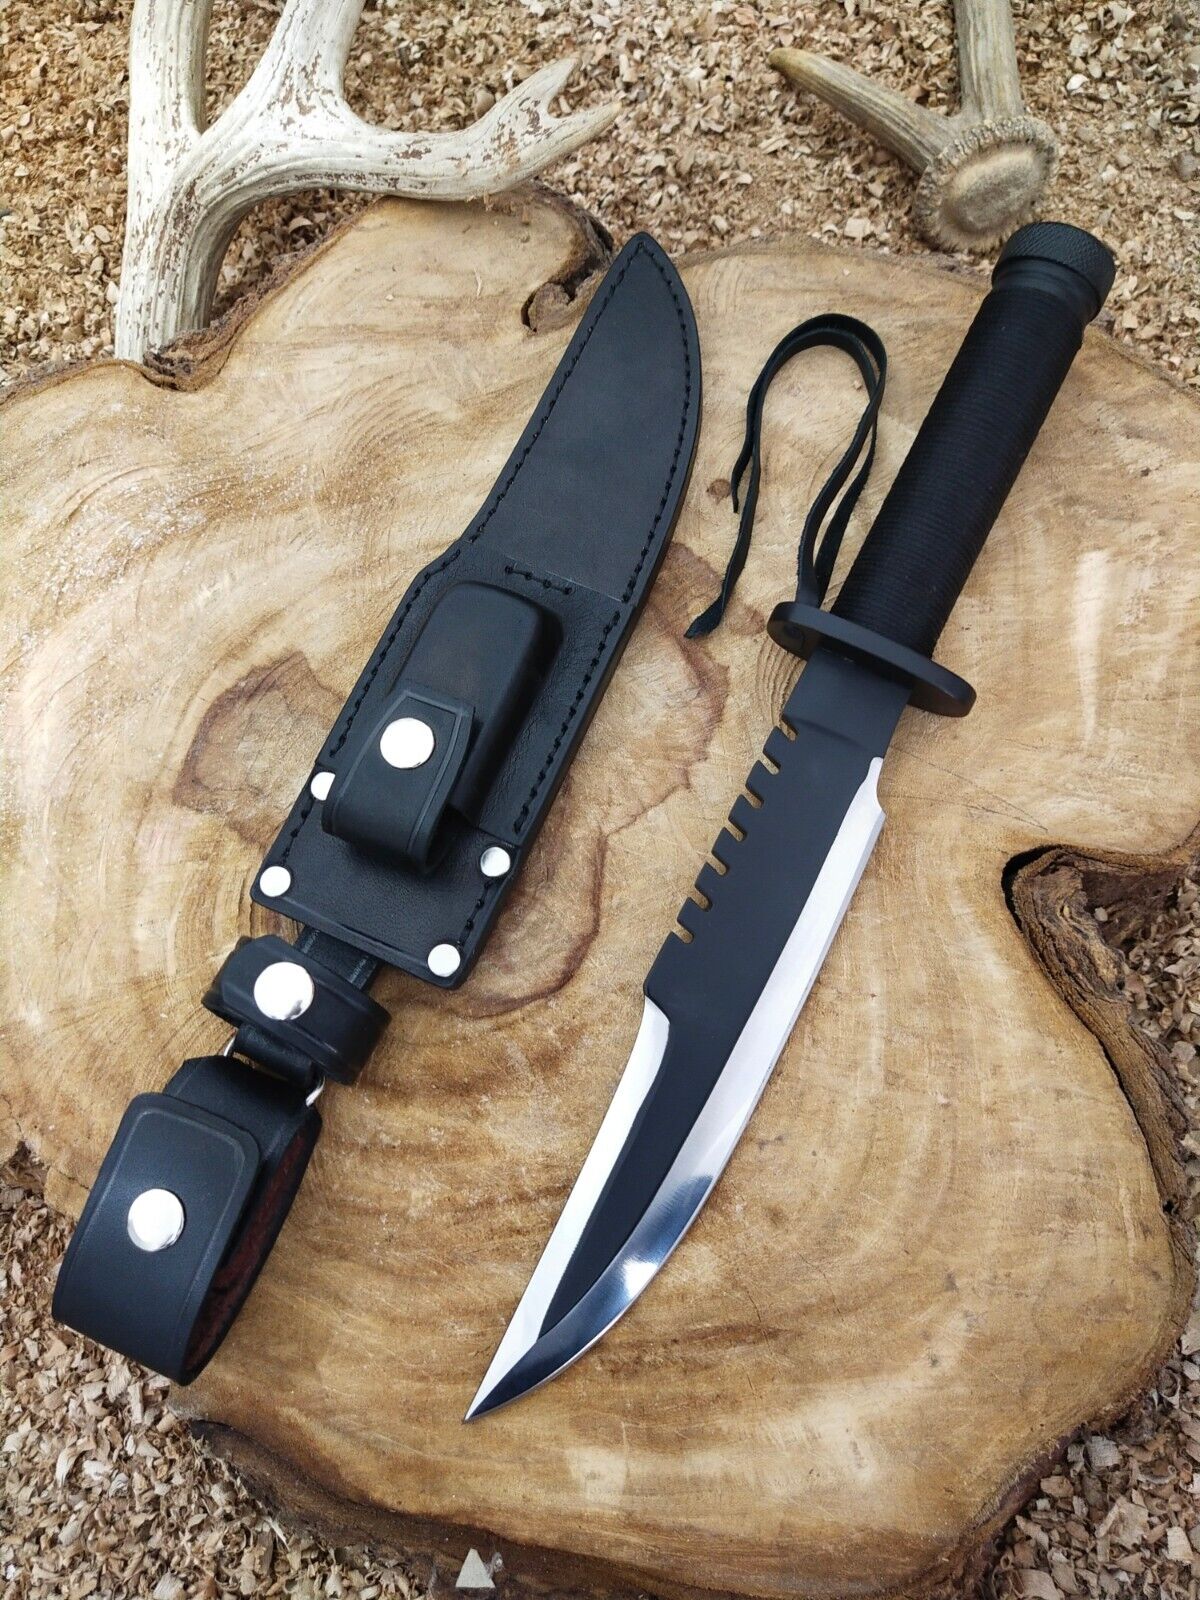 Authentic Rambo Knife: Stainless Steel Survival Gear - Overall length 13.25 inch